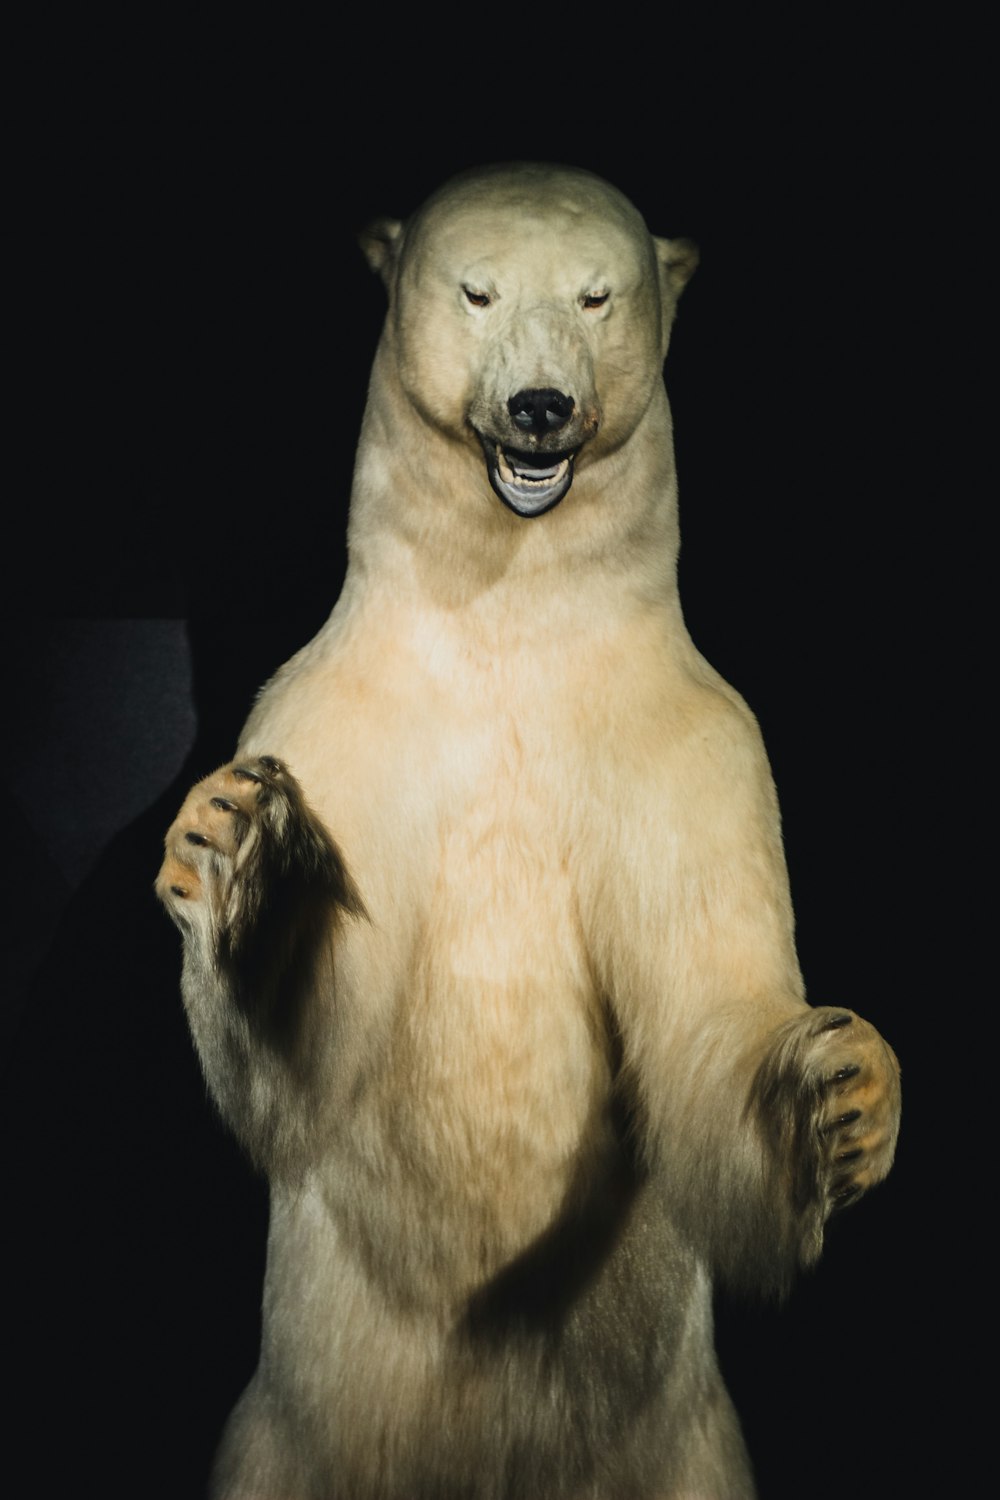 a bear with its arms outstretched